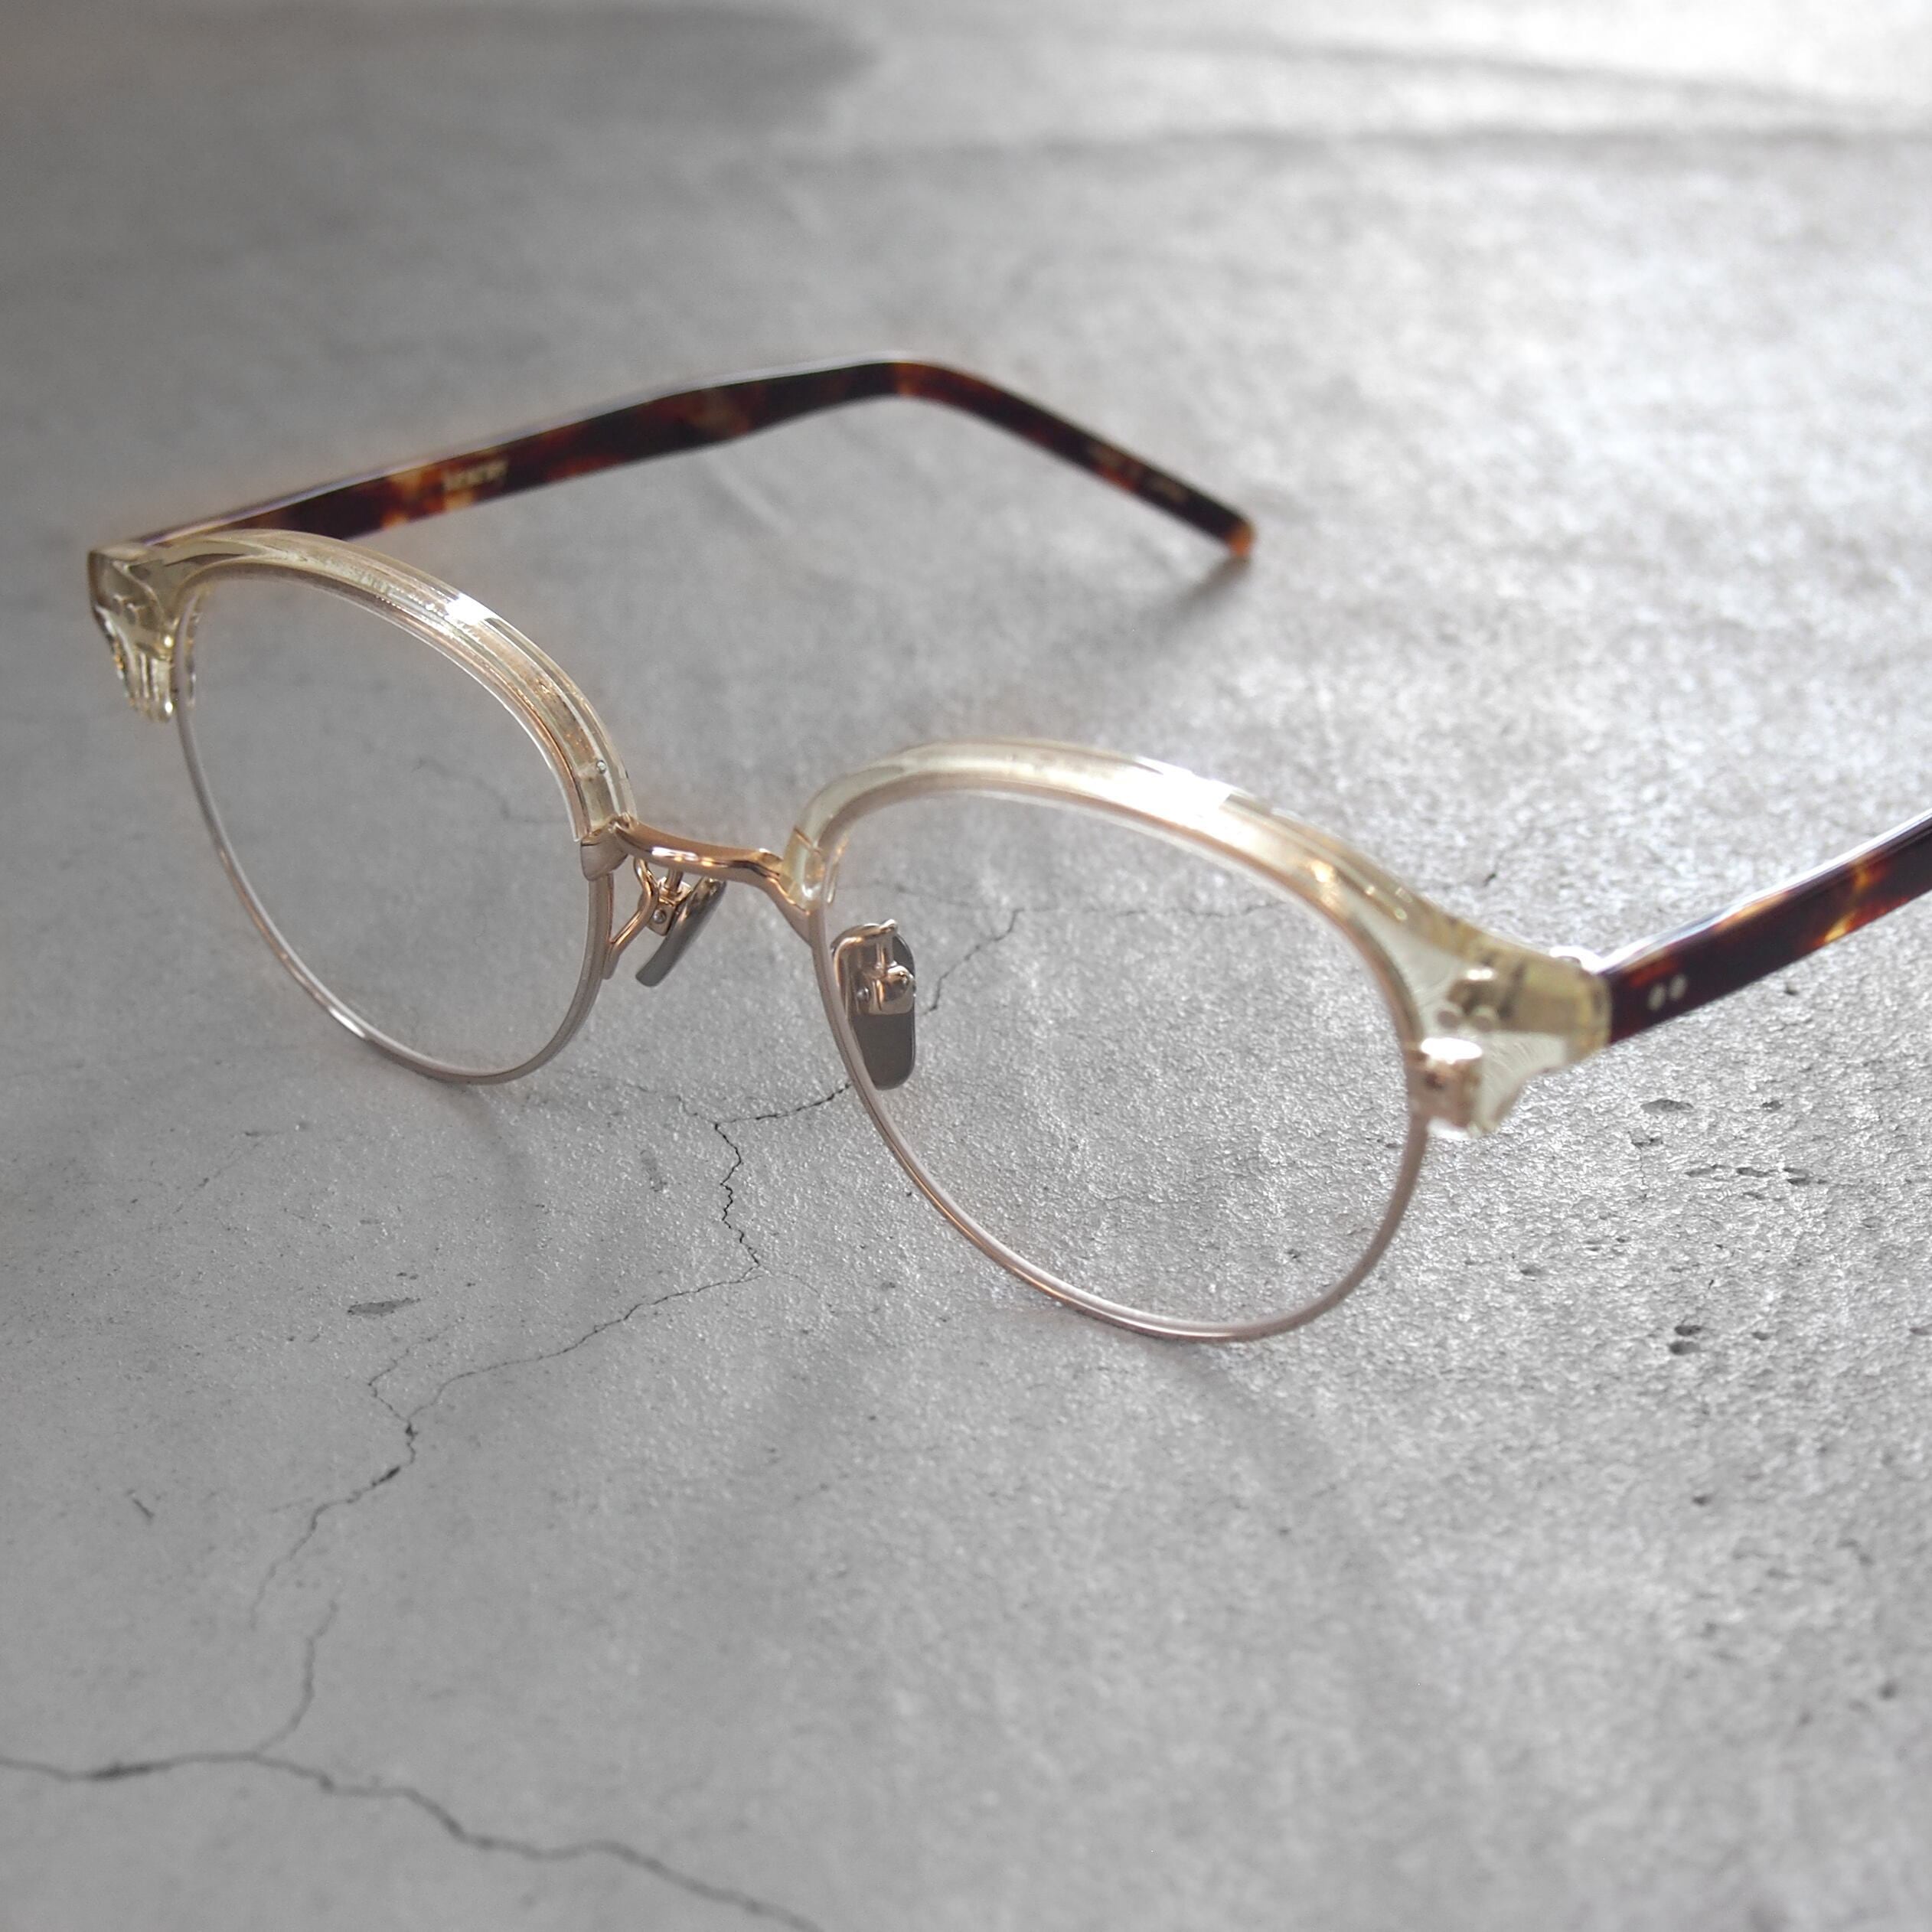 Kearny Sirmont brow clear yellow/鼈甲 (clear lens) | Rin 